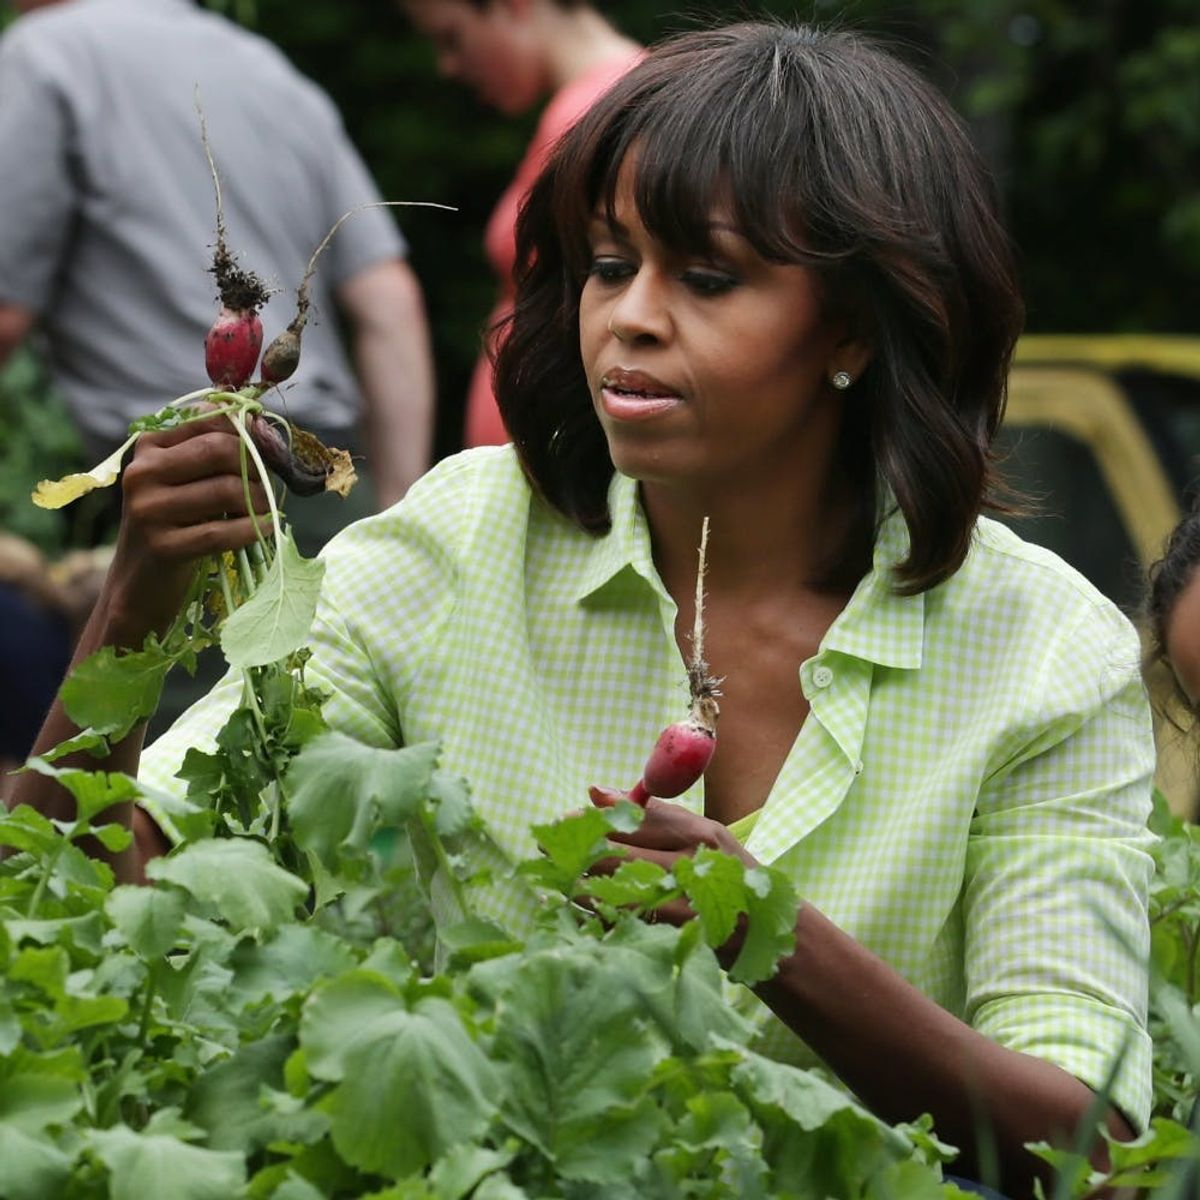 Find Out What Will Happen to Michelle Obama’s White House Vegetable Garden